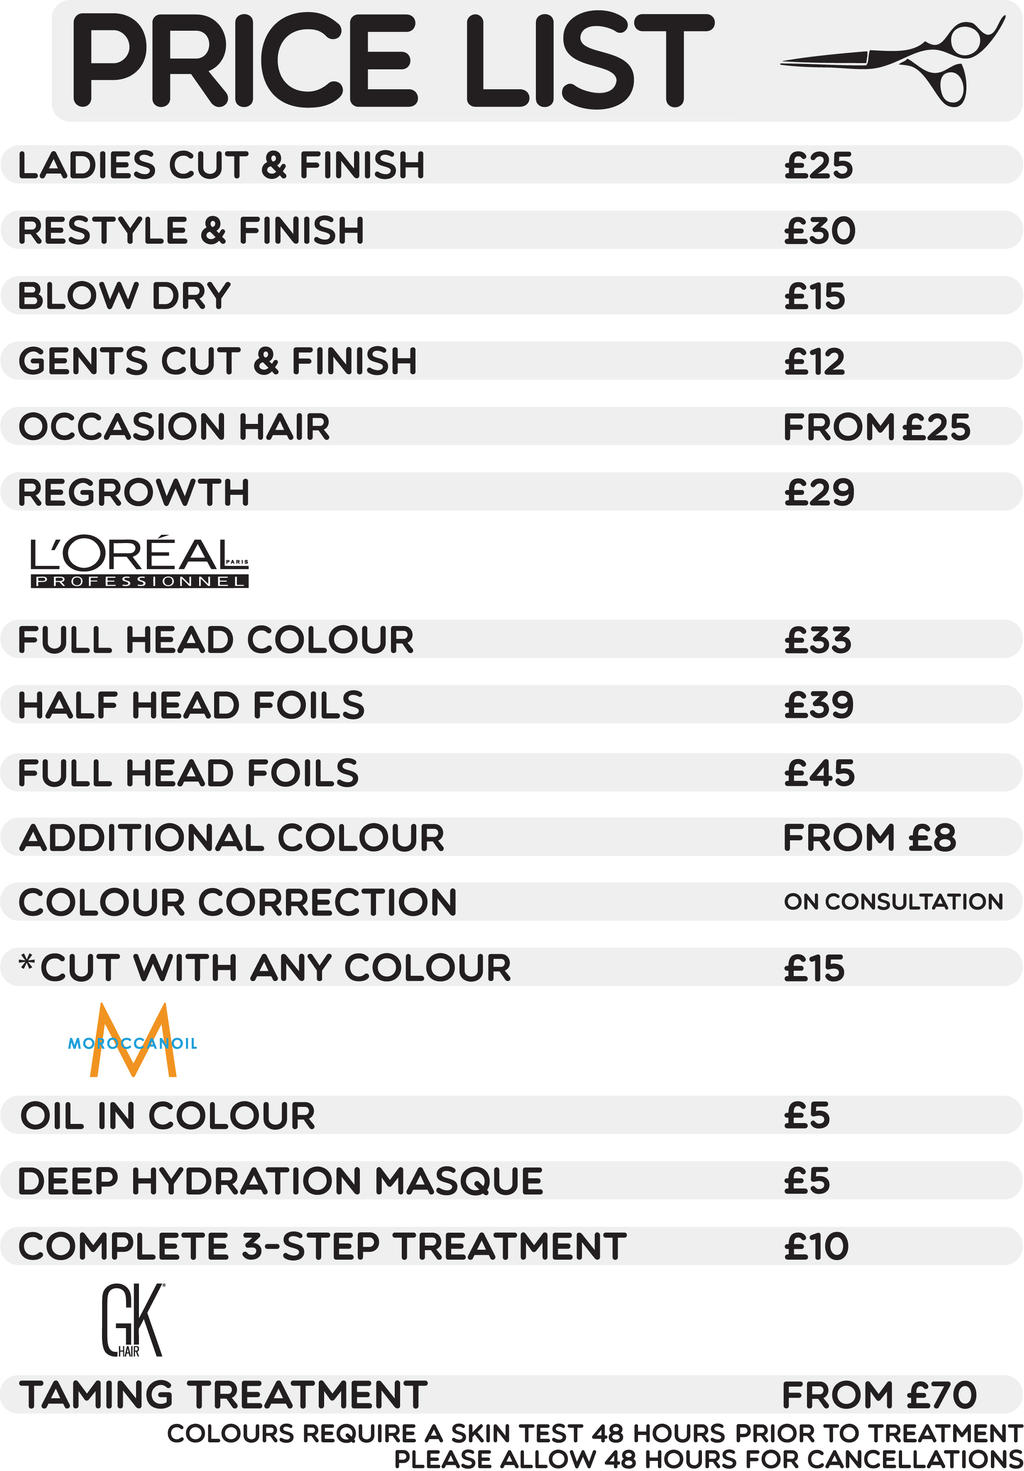 Hairdressing Pricelist by xcalloomx on DeviantArt